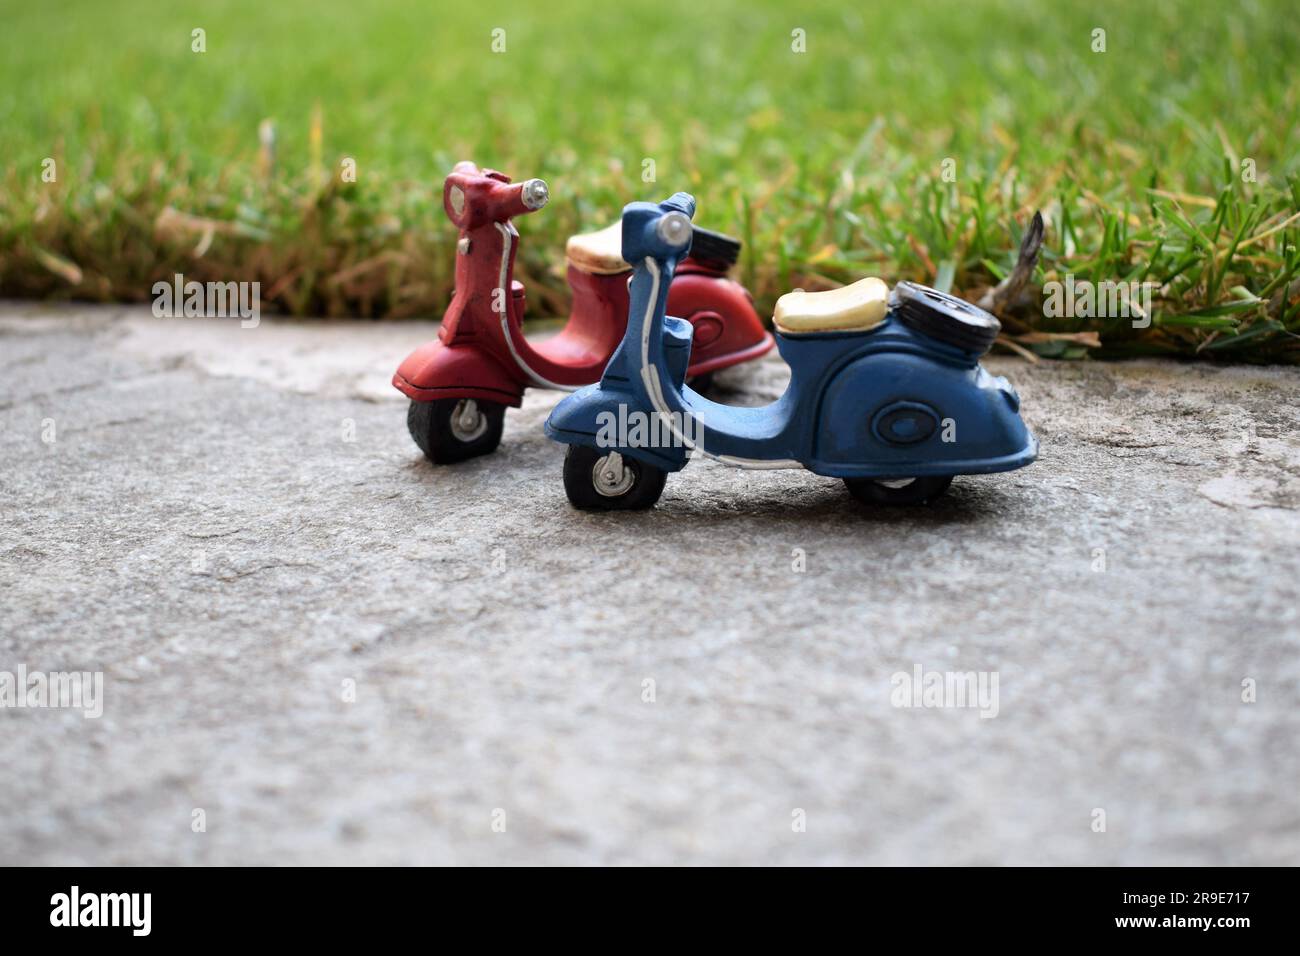 Miniature toy scooters on pavement Stock Photo